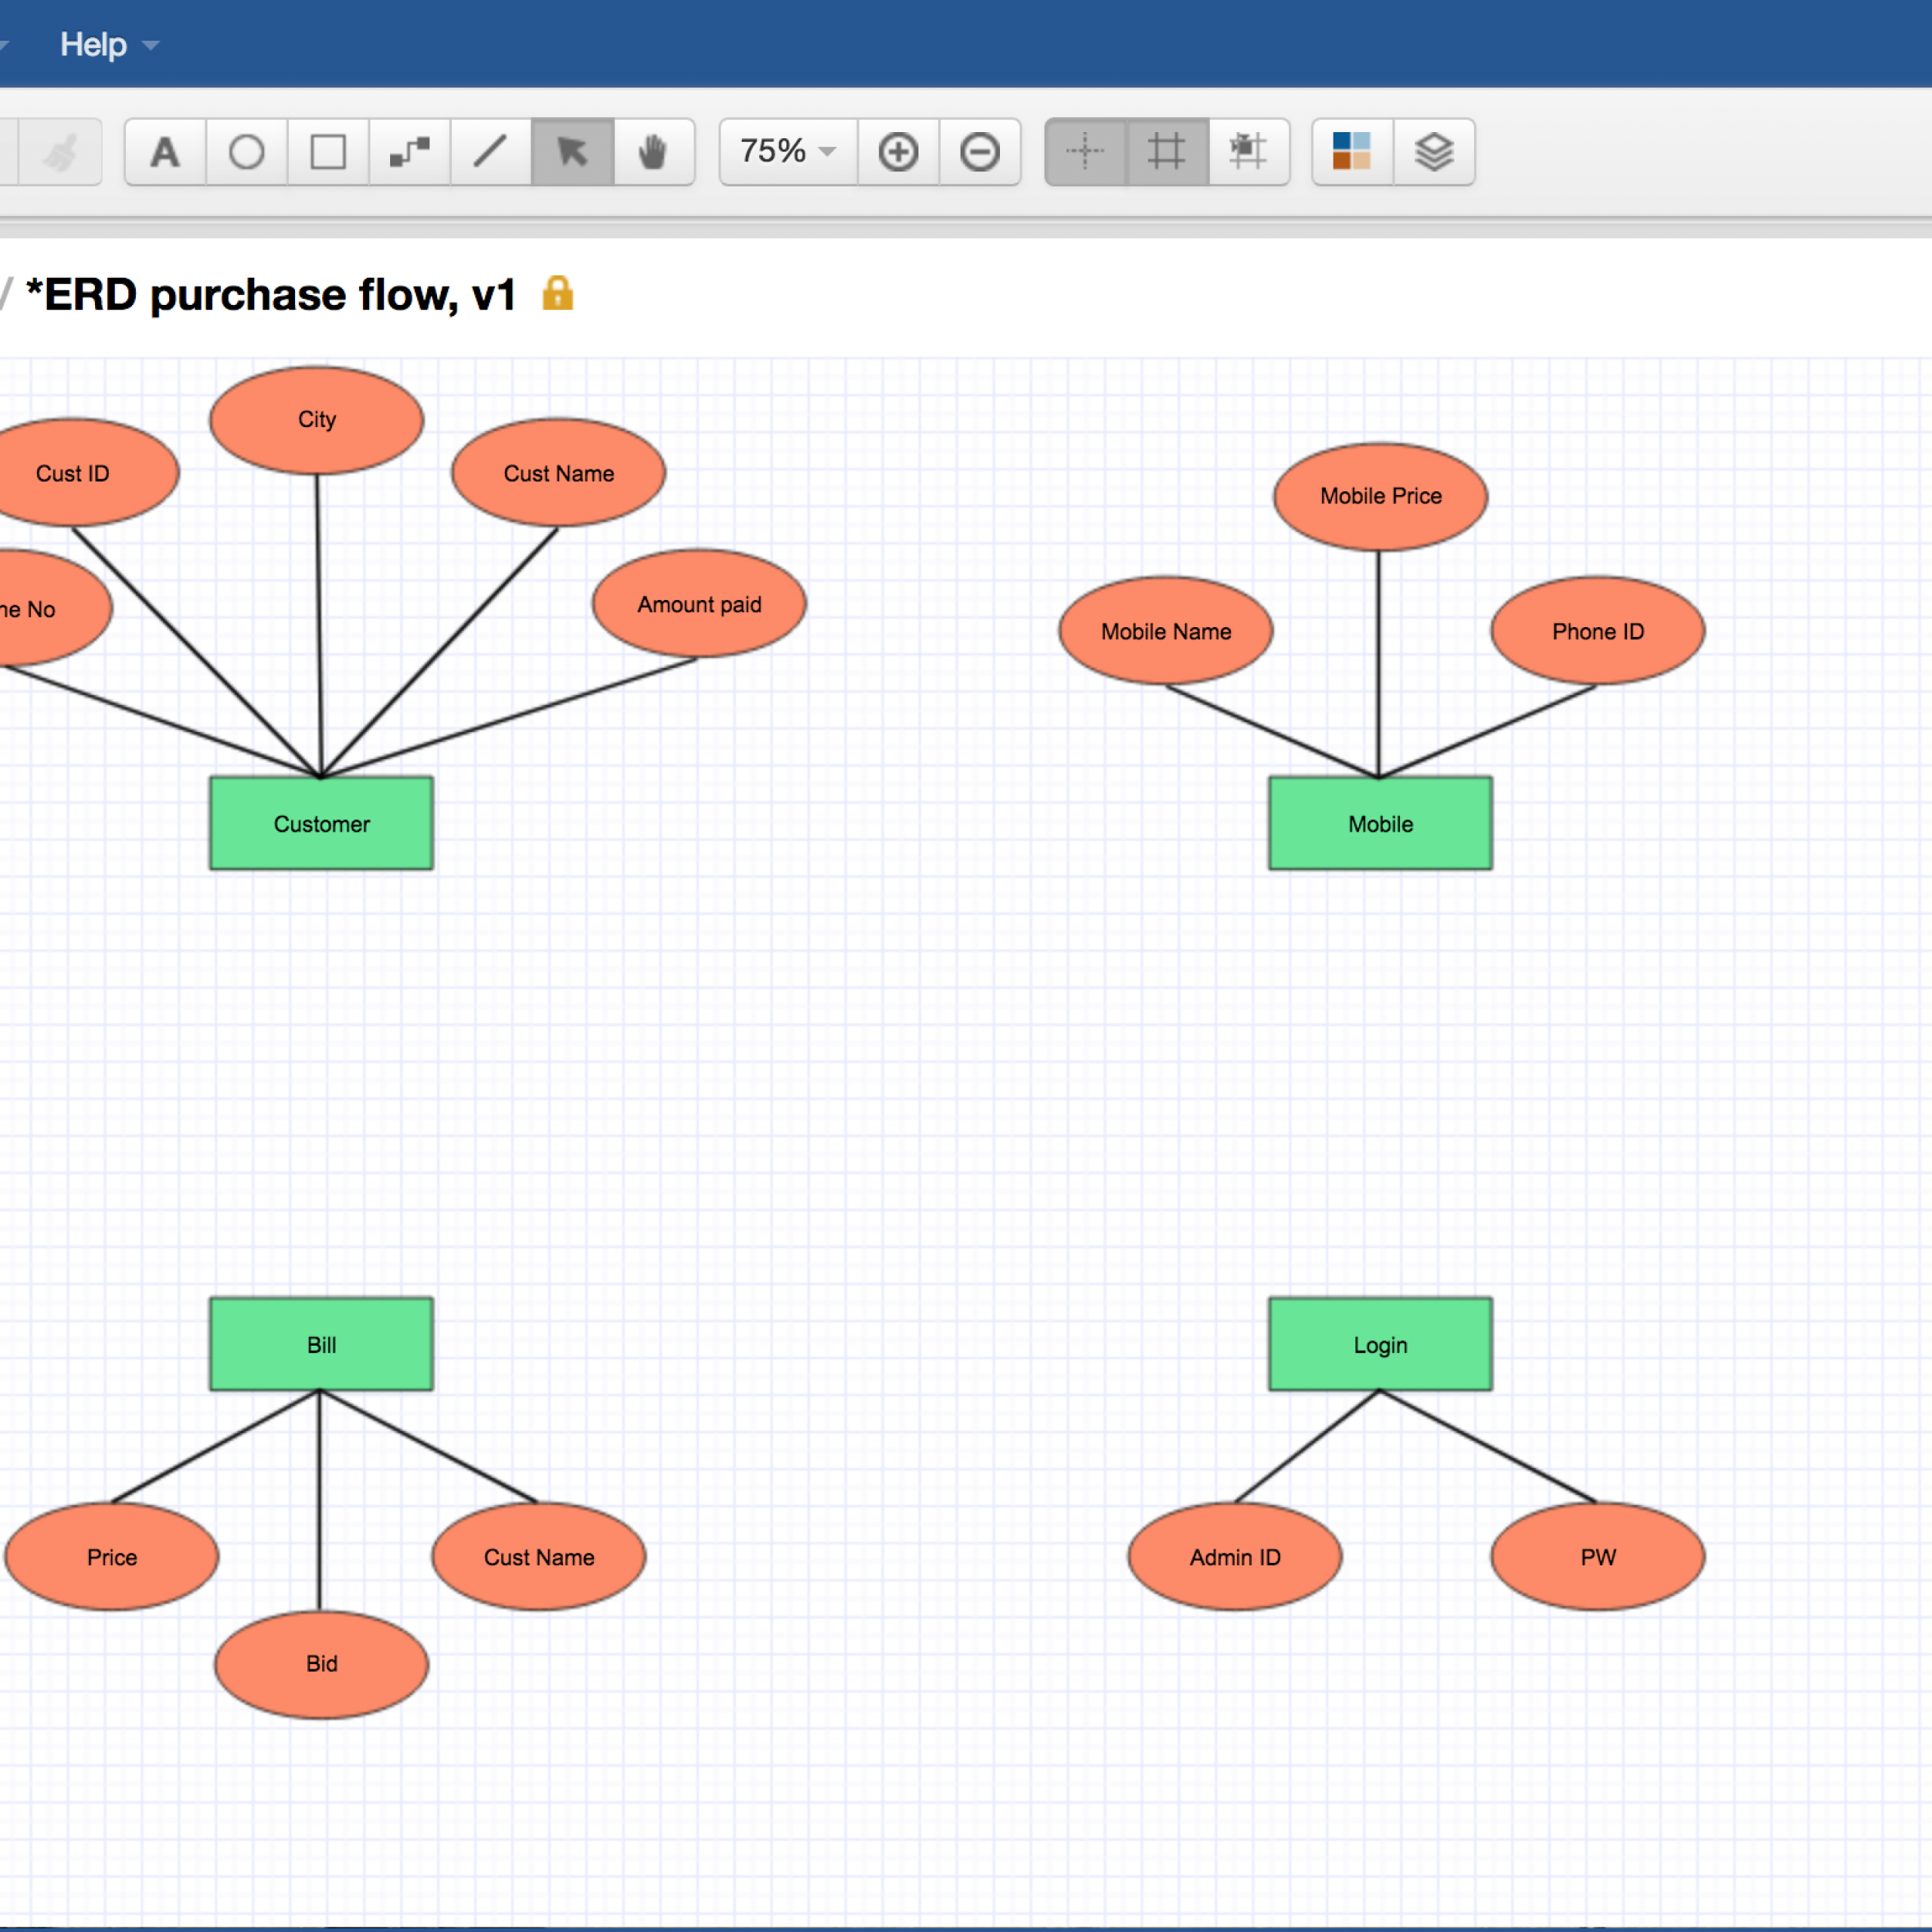 How To Draw An Entity-Relationship Diagram in Make A Er Diagram